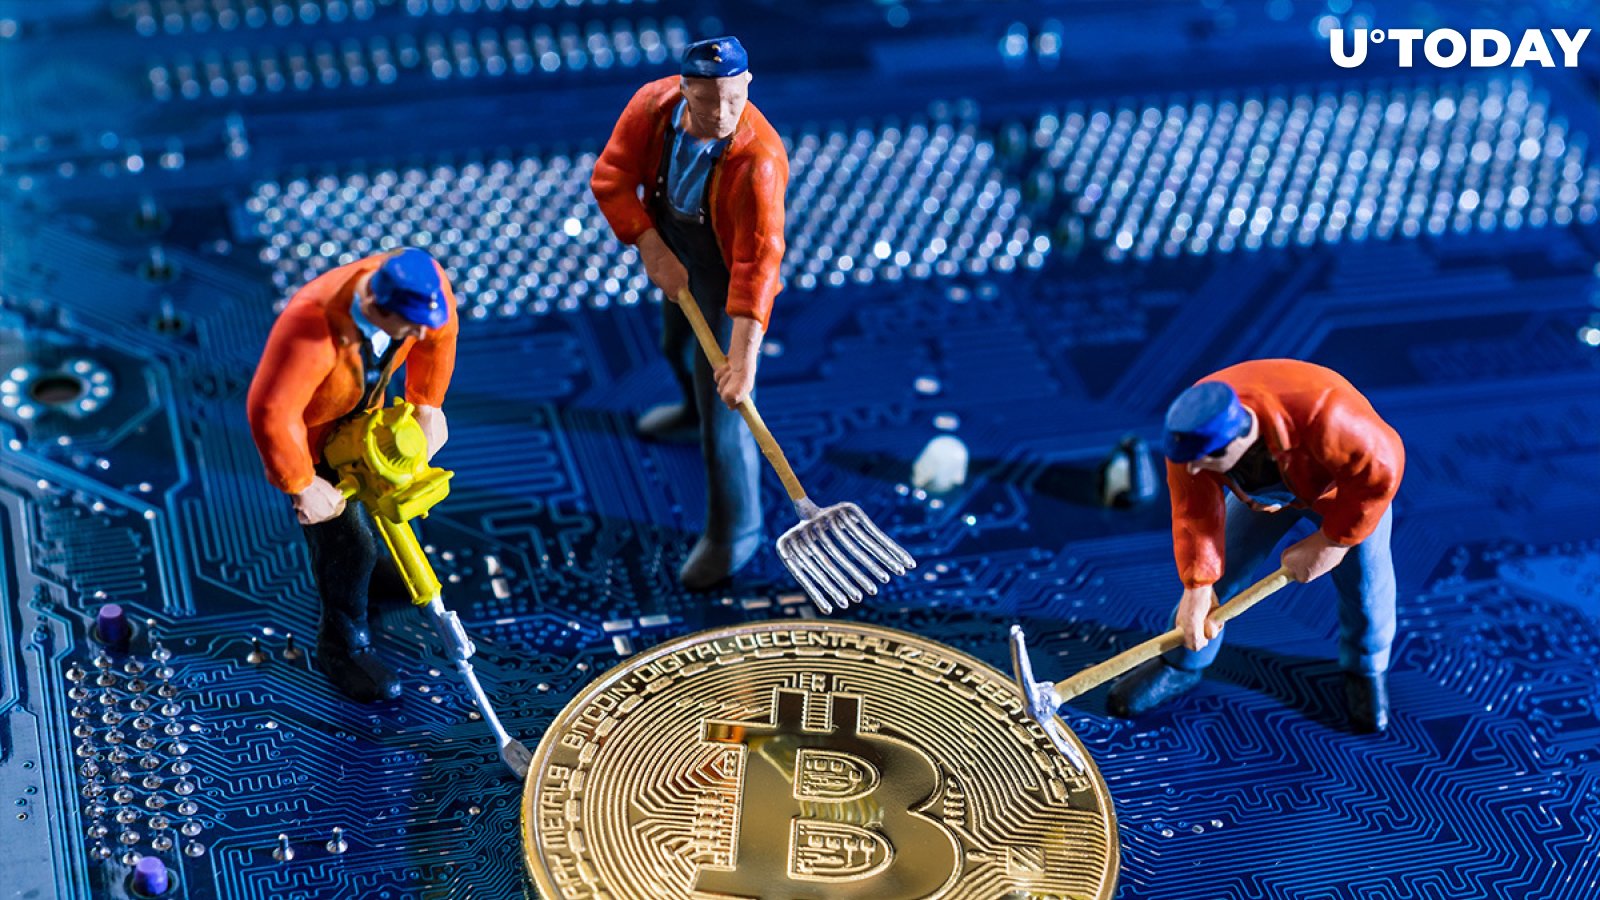 Bitcoin (BTC) Mining Pool CEO Claims Chinese Crackdown May Be Exaggerated, Here's Why